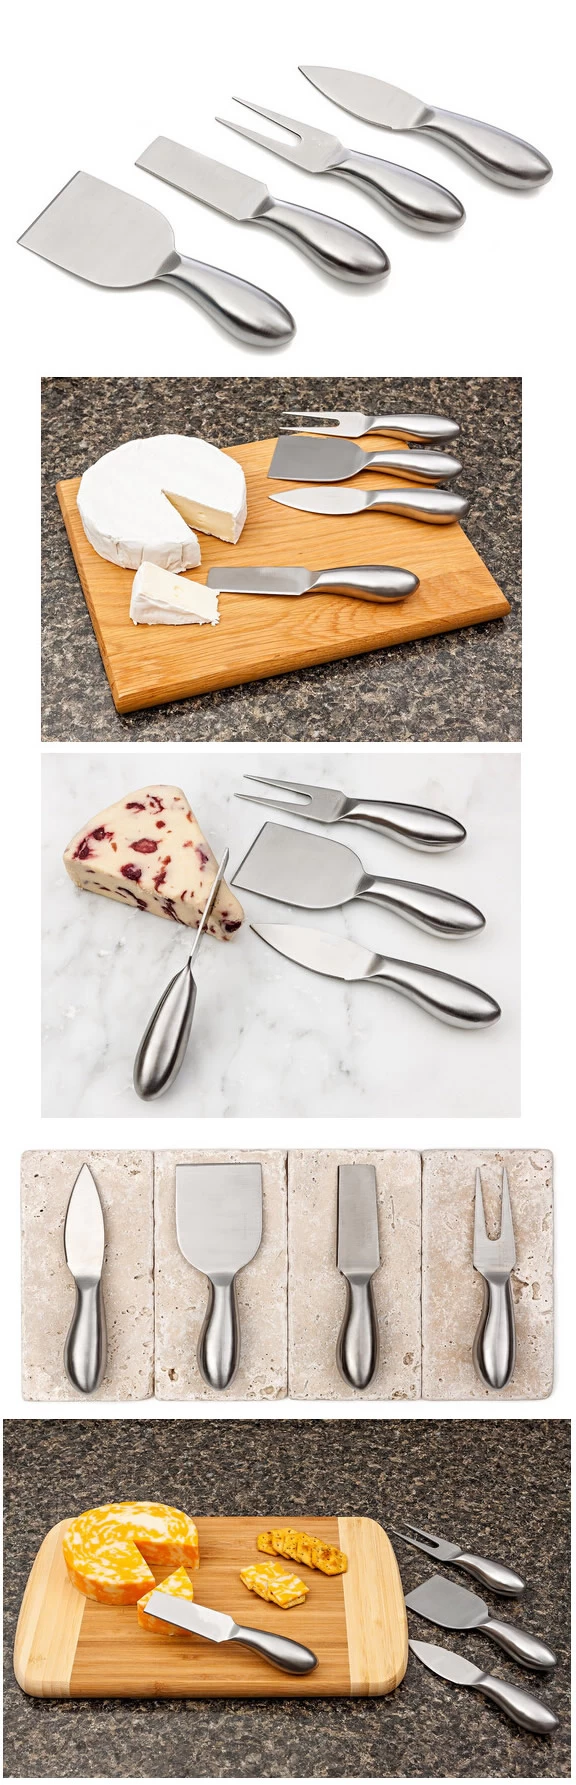 Stainless Steel cheese knives